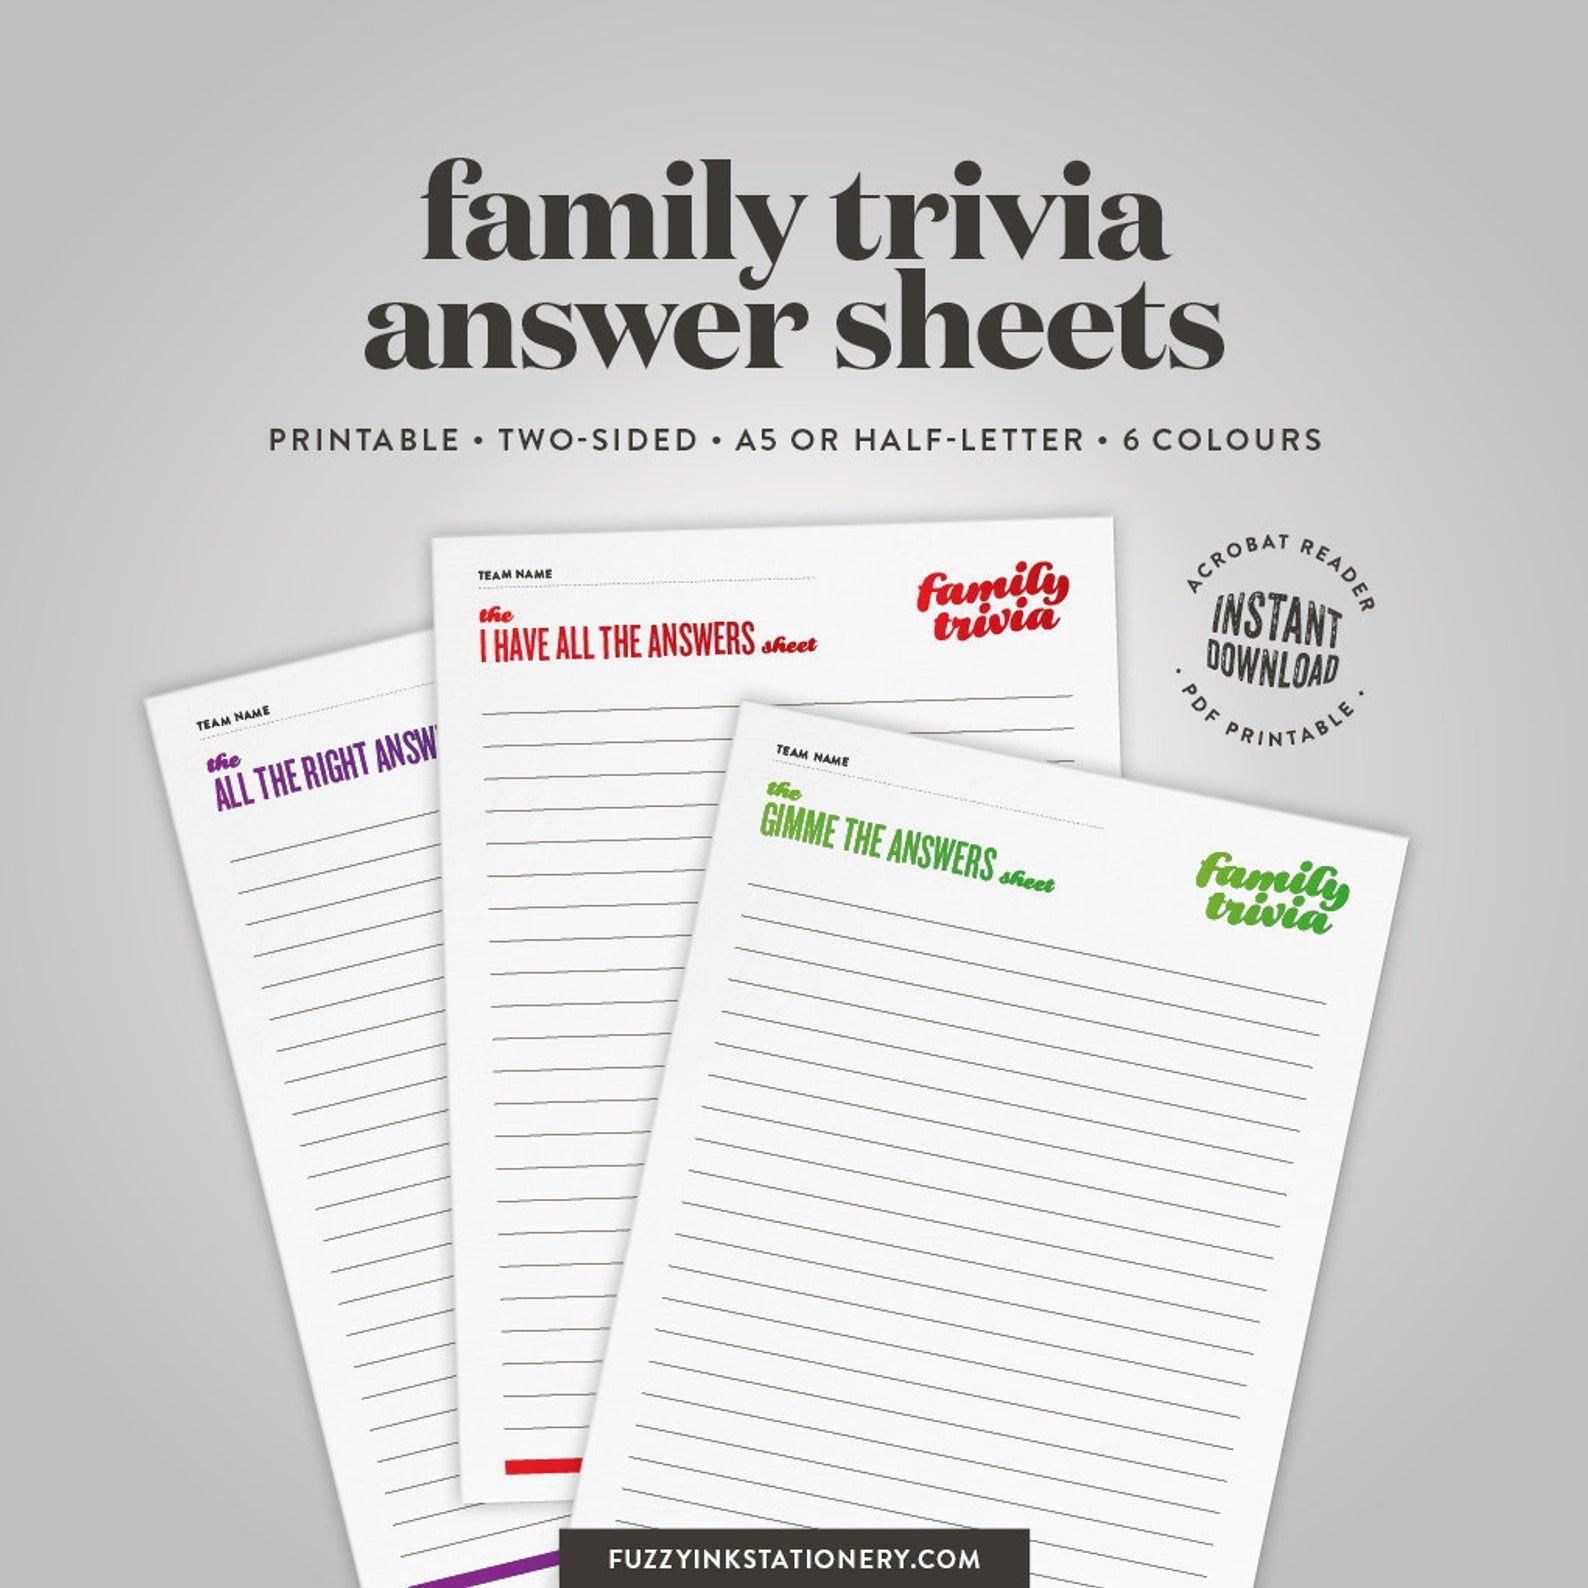 Family Trivia Answers Sheet Printable For Family Reunion Party Games 